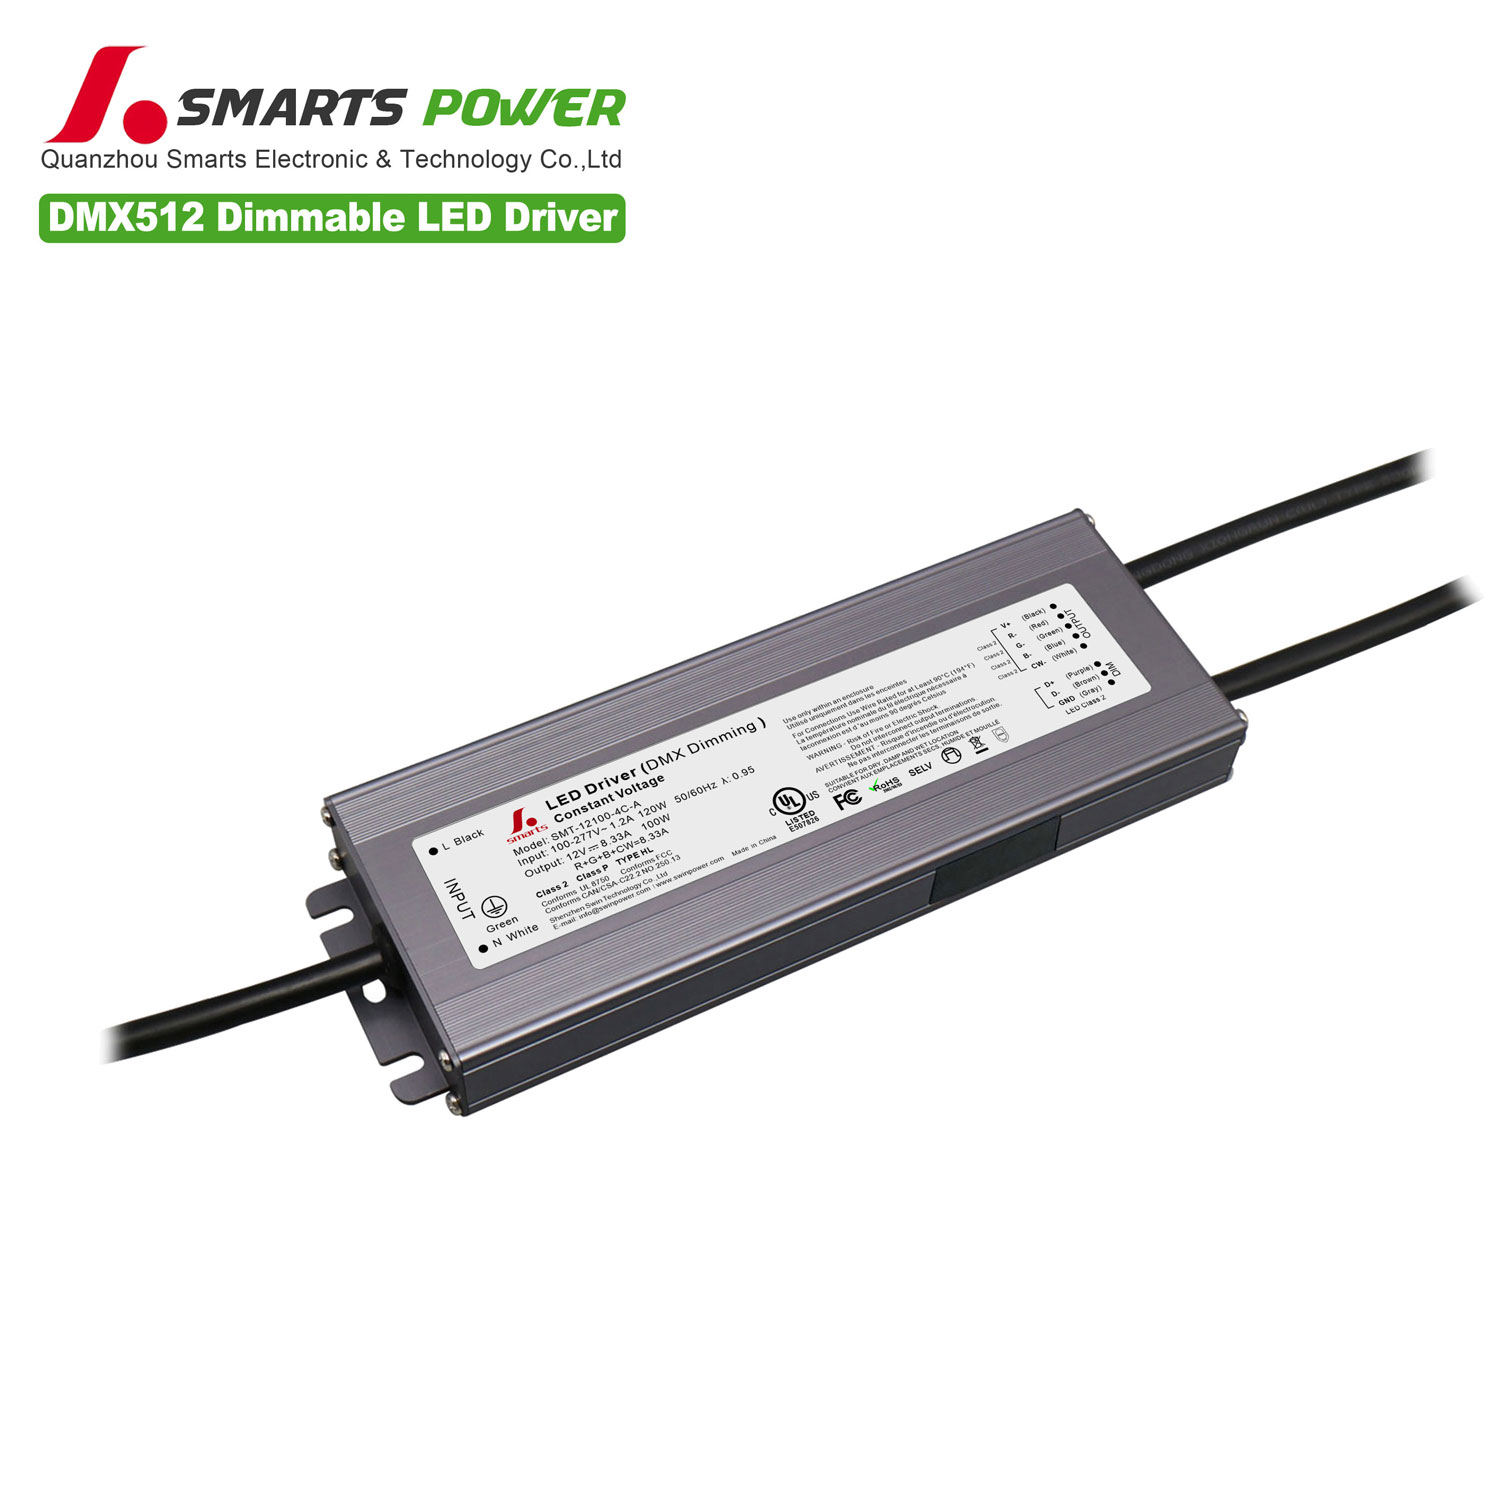 dimmable 24v led driver